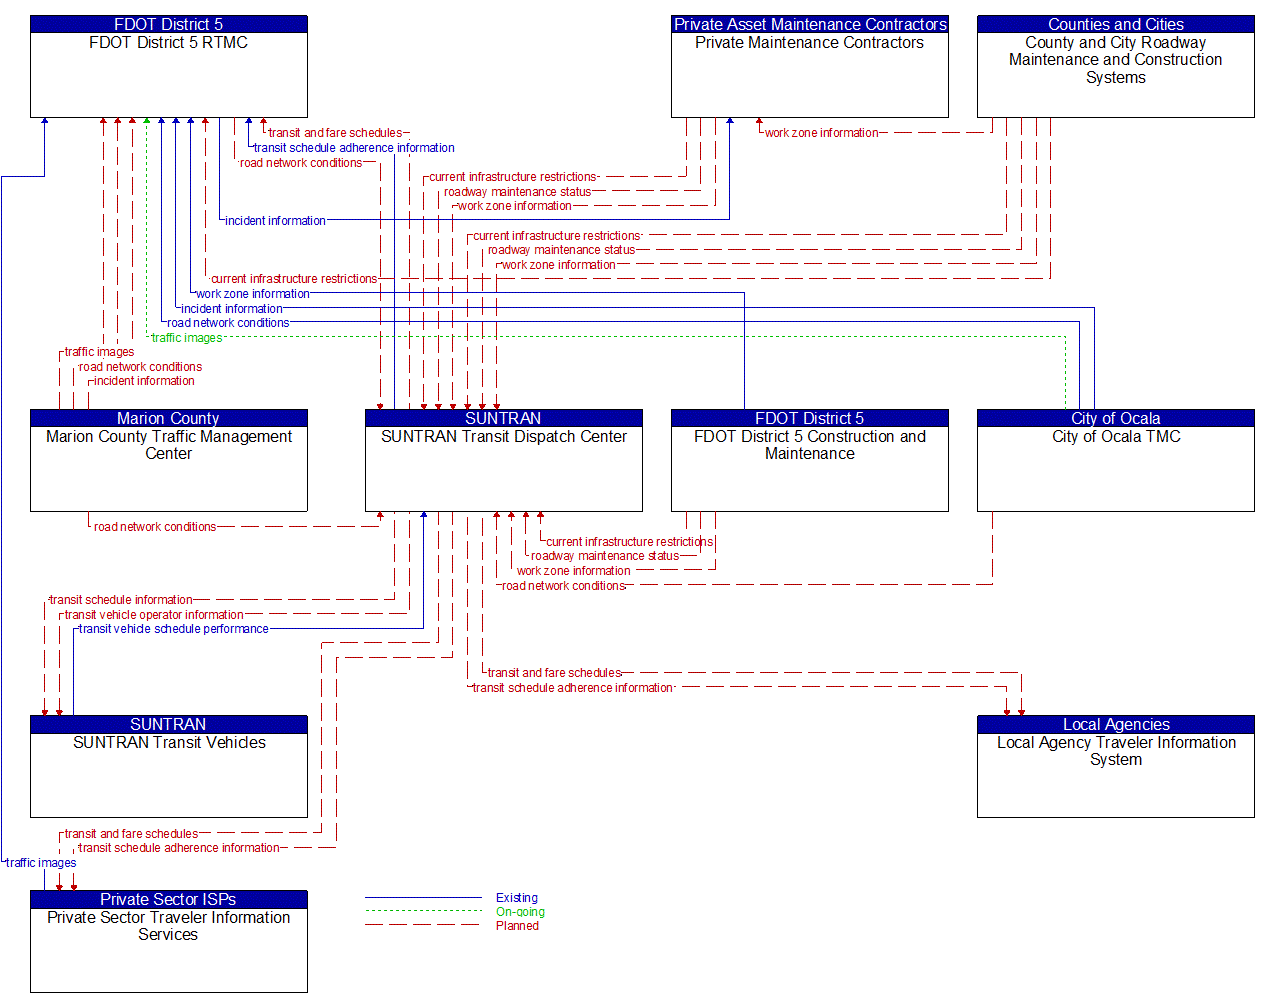 Service Graphic: Transit Fixed-Route Operations (SUNTRAN)